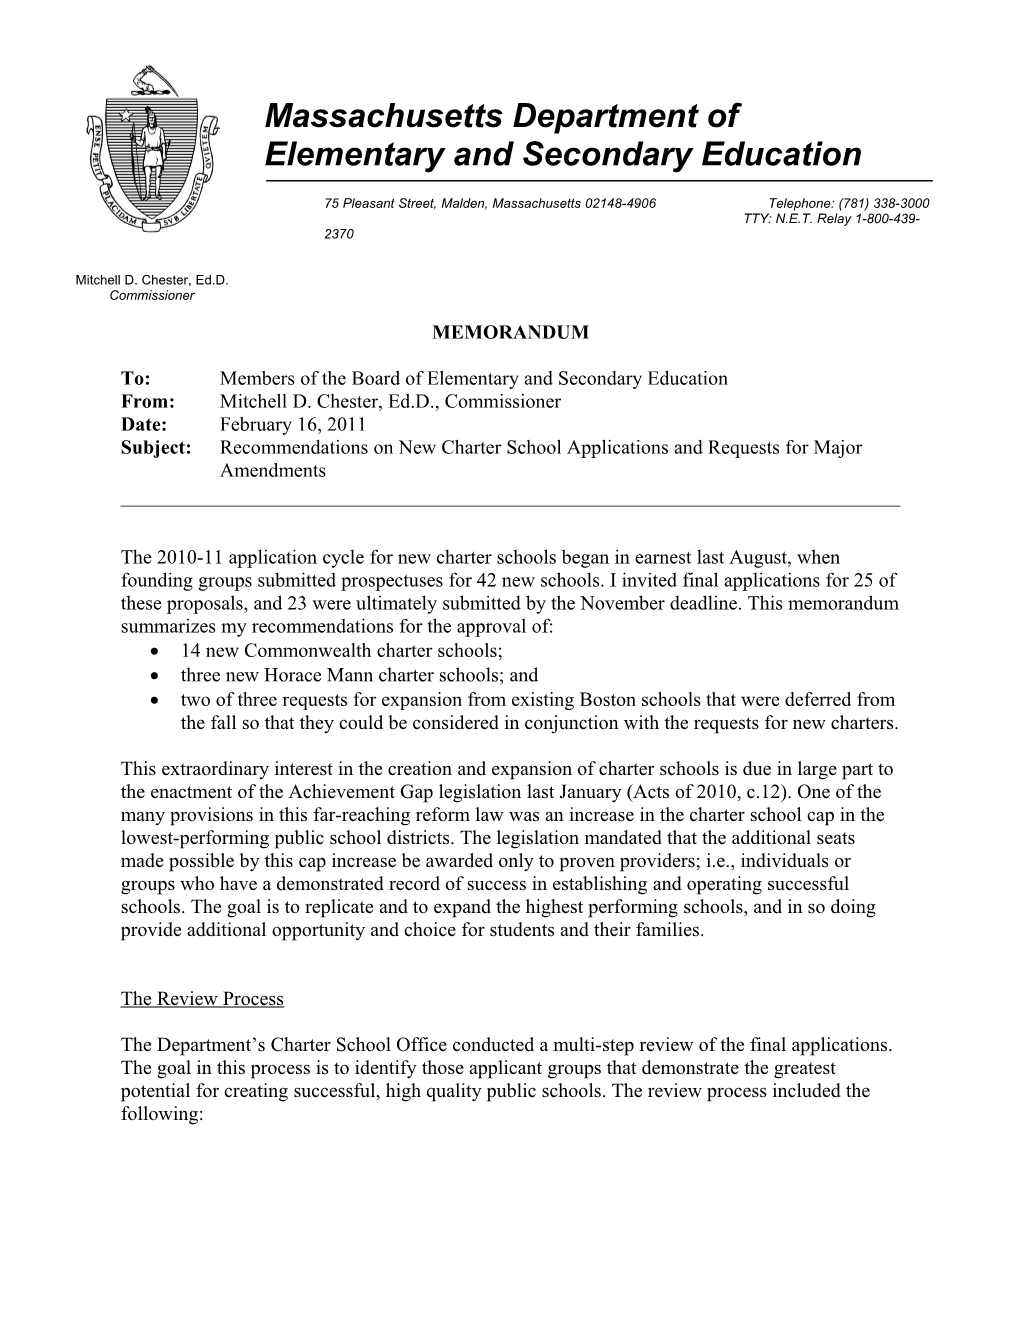 Board Memorandum, Recommendations on New Charter School Applications and Requests for Major